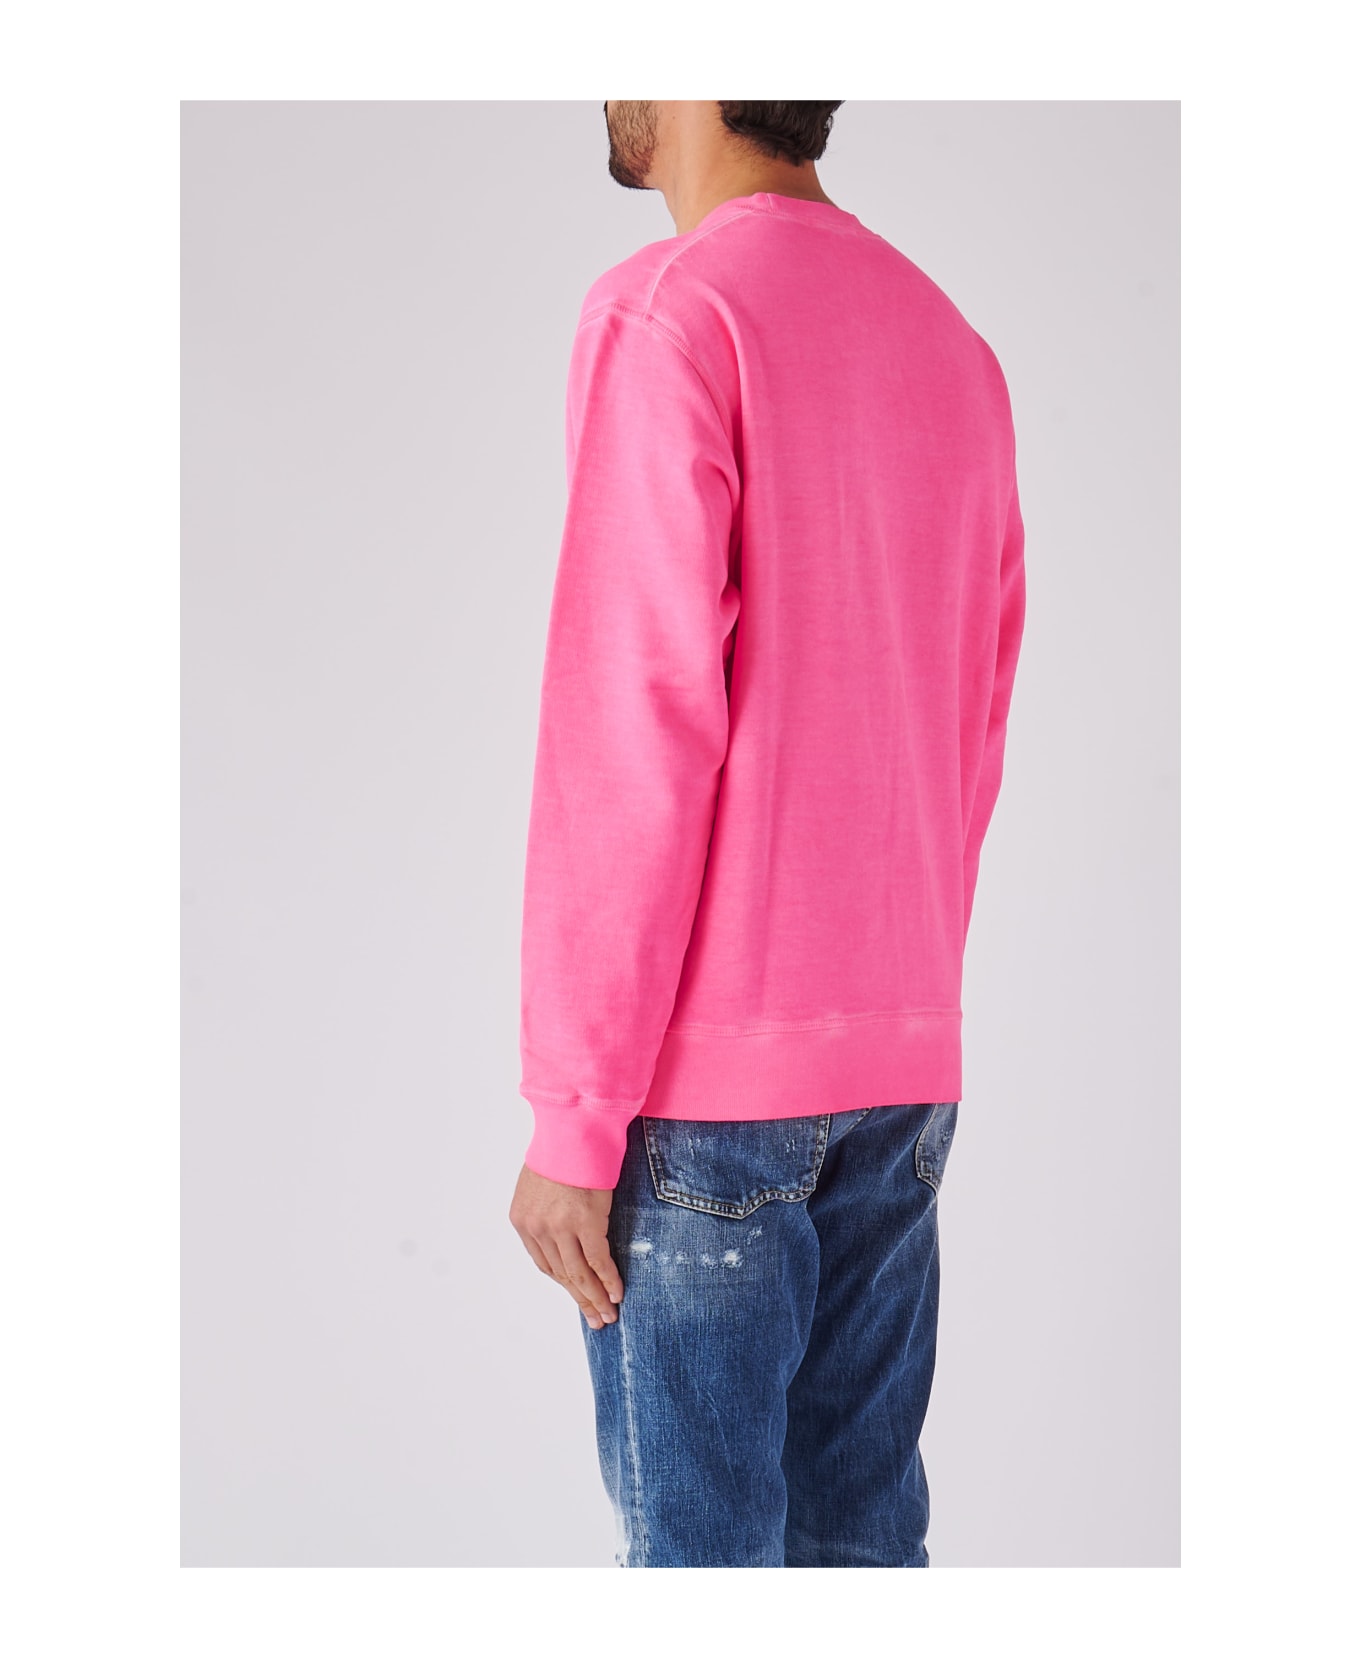 Dsquared2 Be Icon Cool Fit Tee Crewneck Sweatshirt - ROSA FLUO フリース